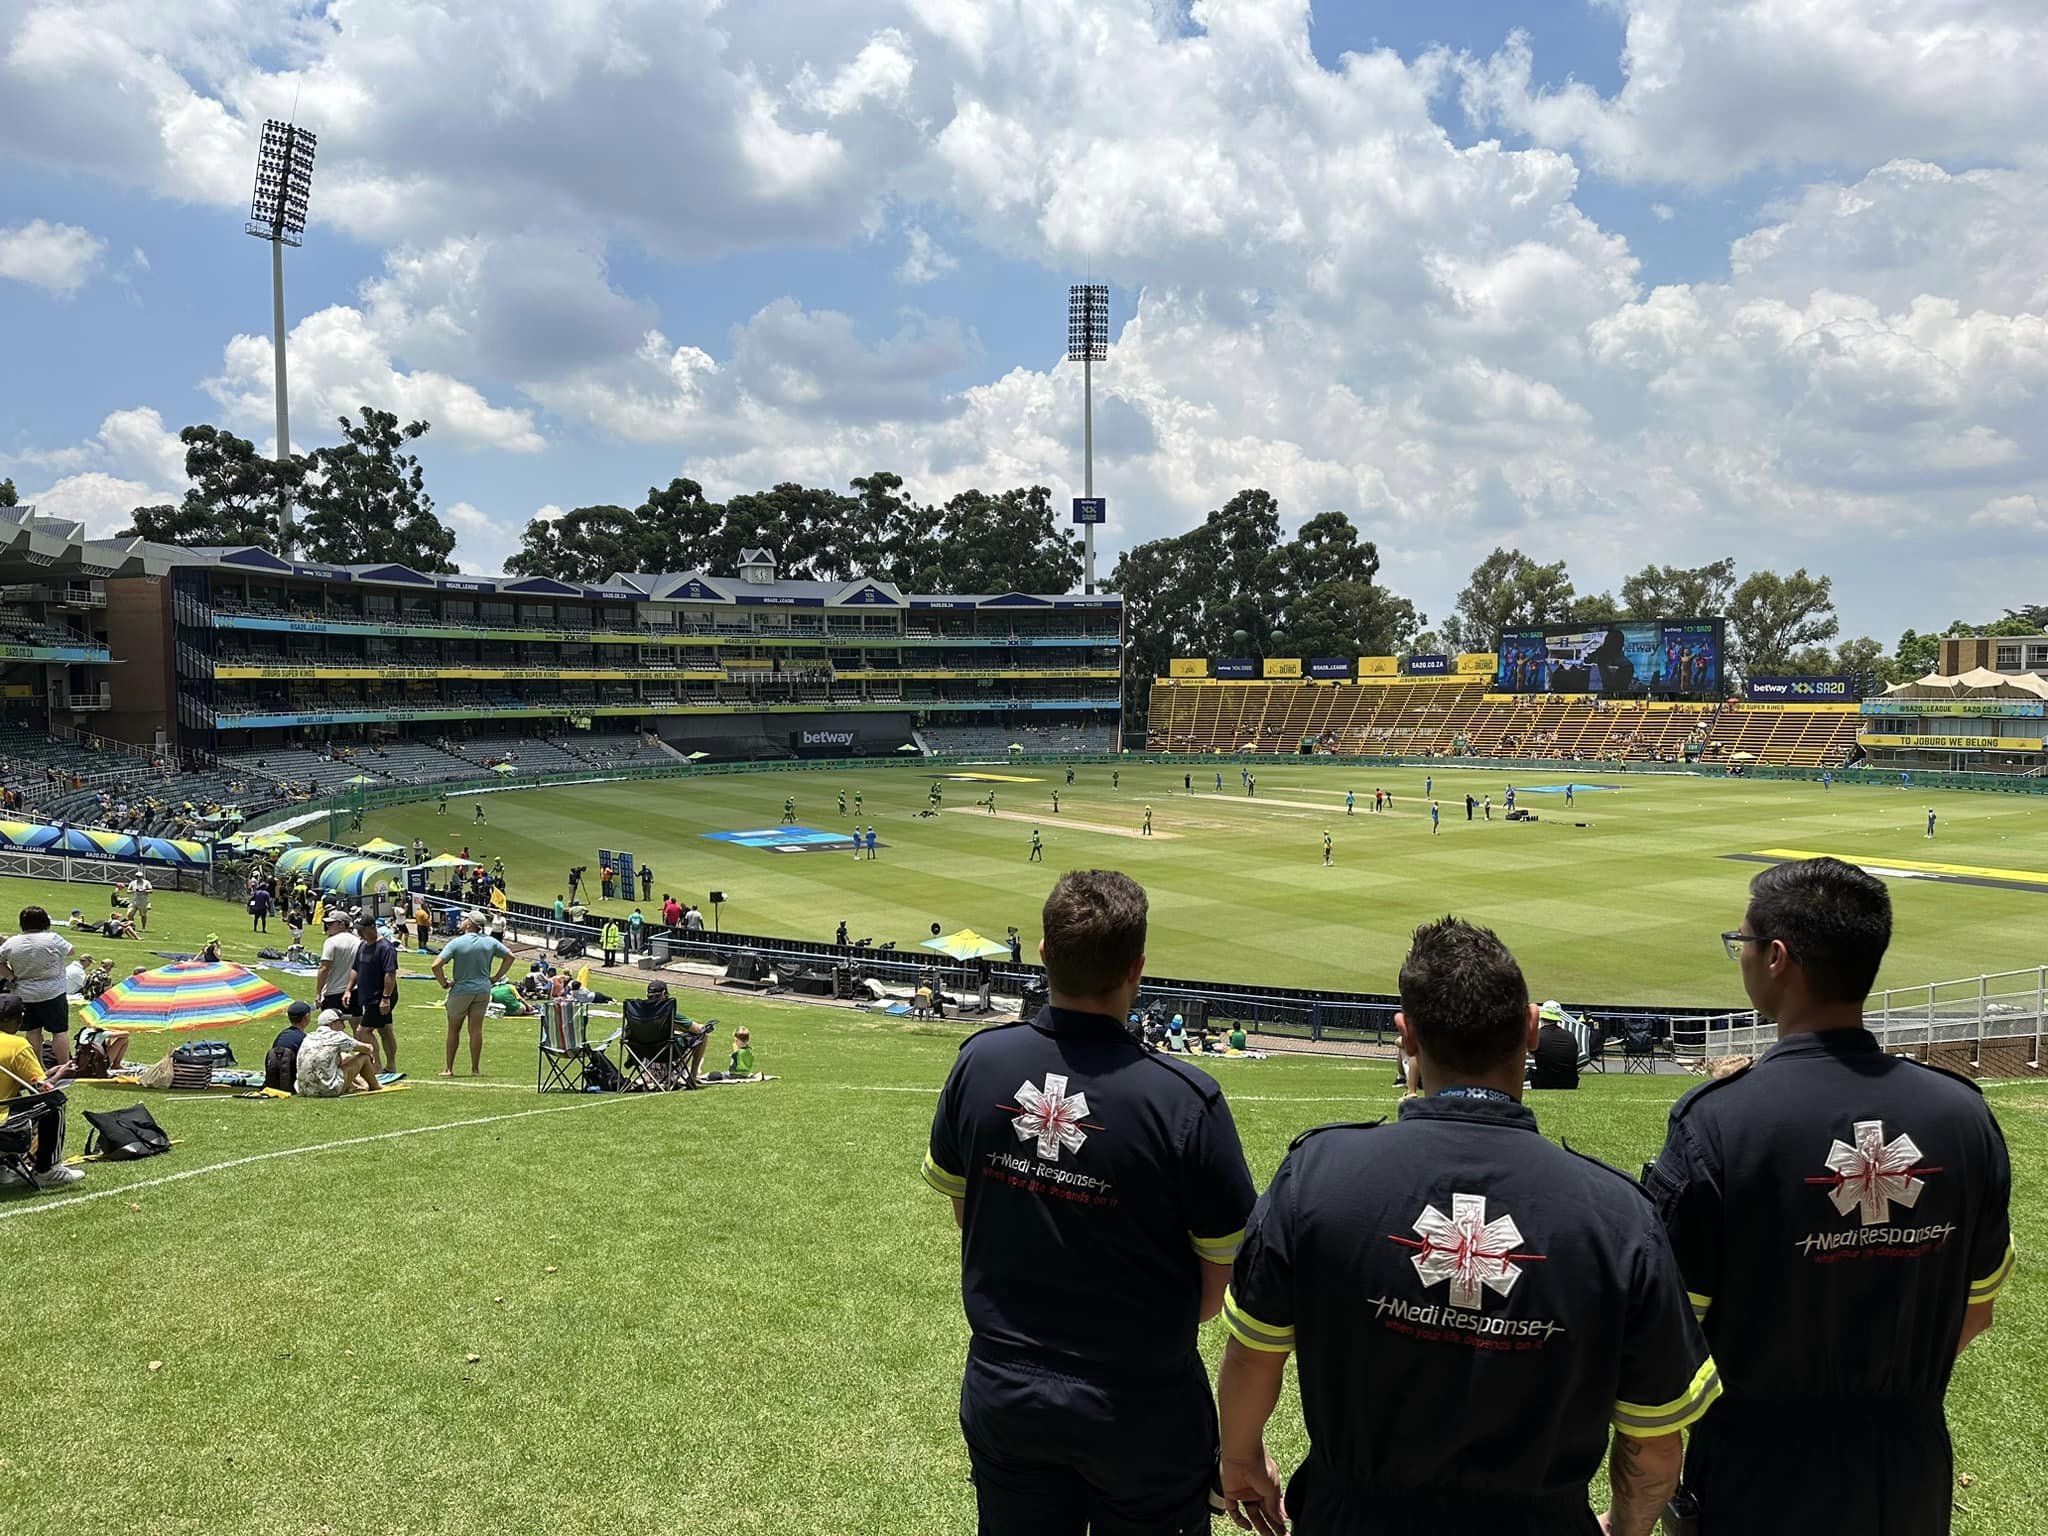 Emergency services ready for any medical emergencies at the SA20 Cricket